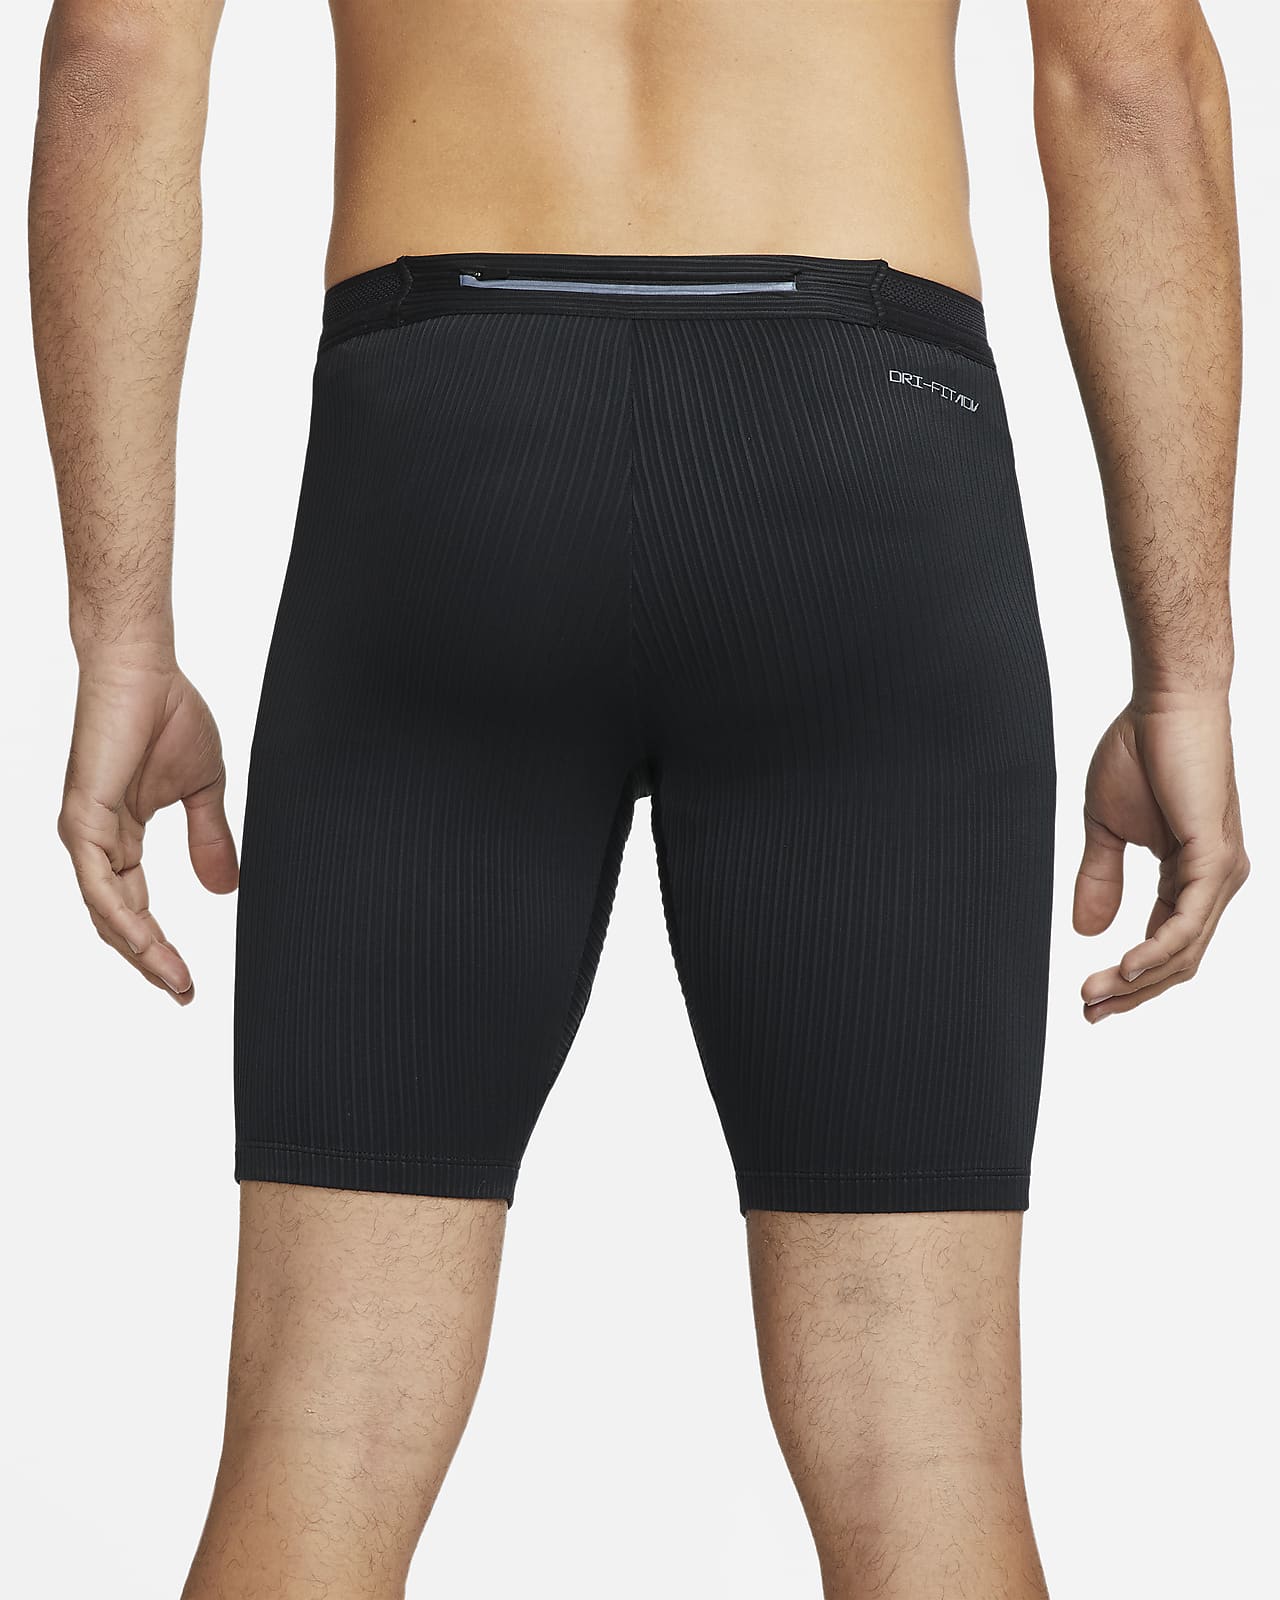 Shorts Tights. Nike IE